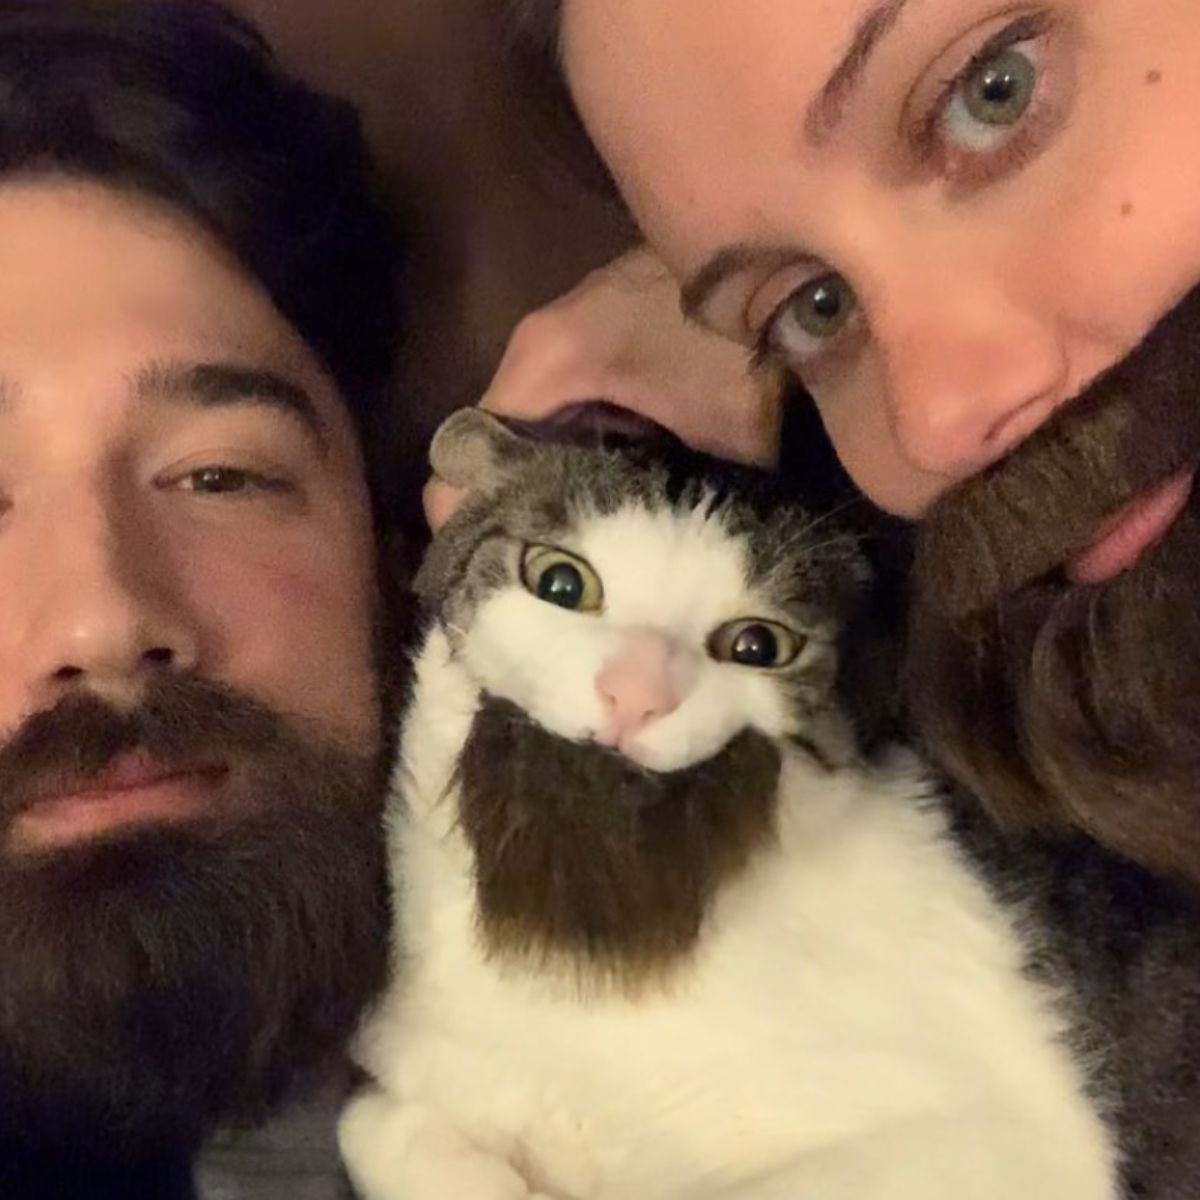 photo of woman, man and cat